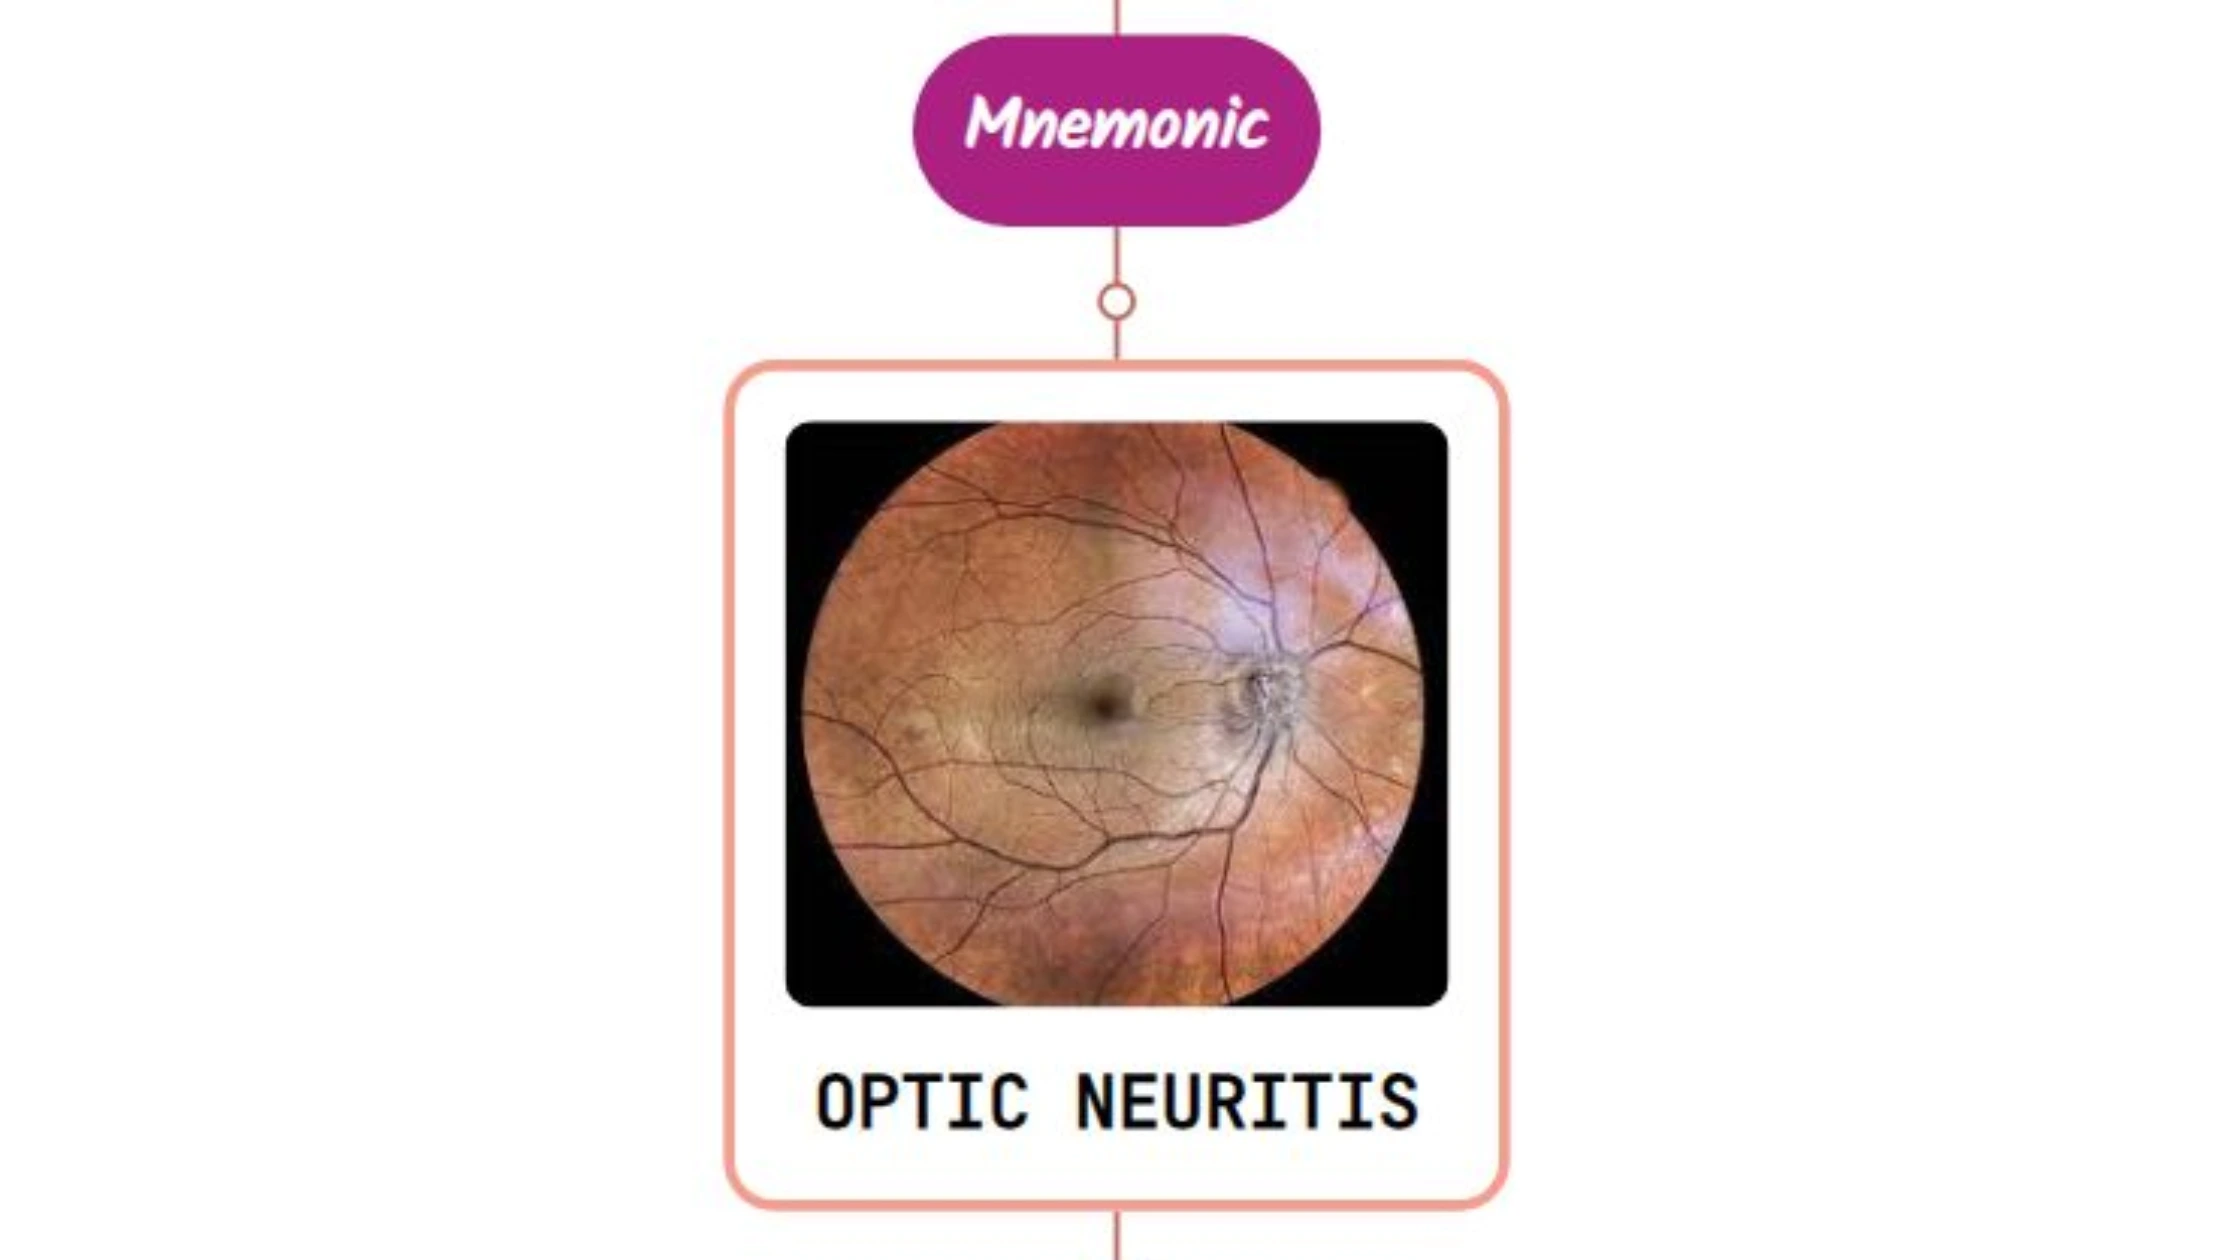 You are currently viewing Optic Neuritis Mnemonic